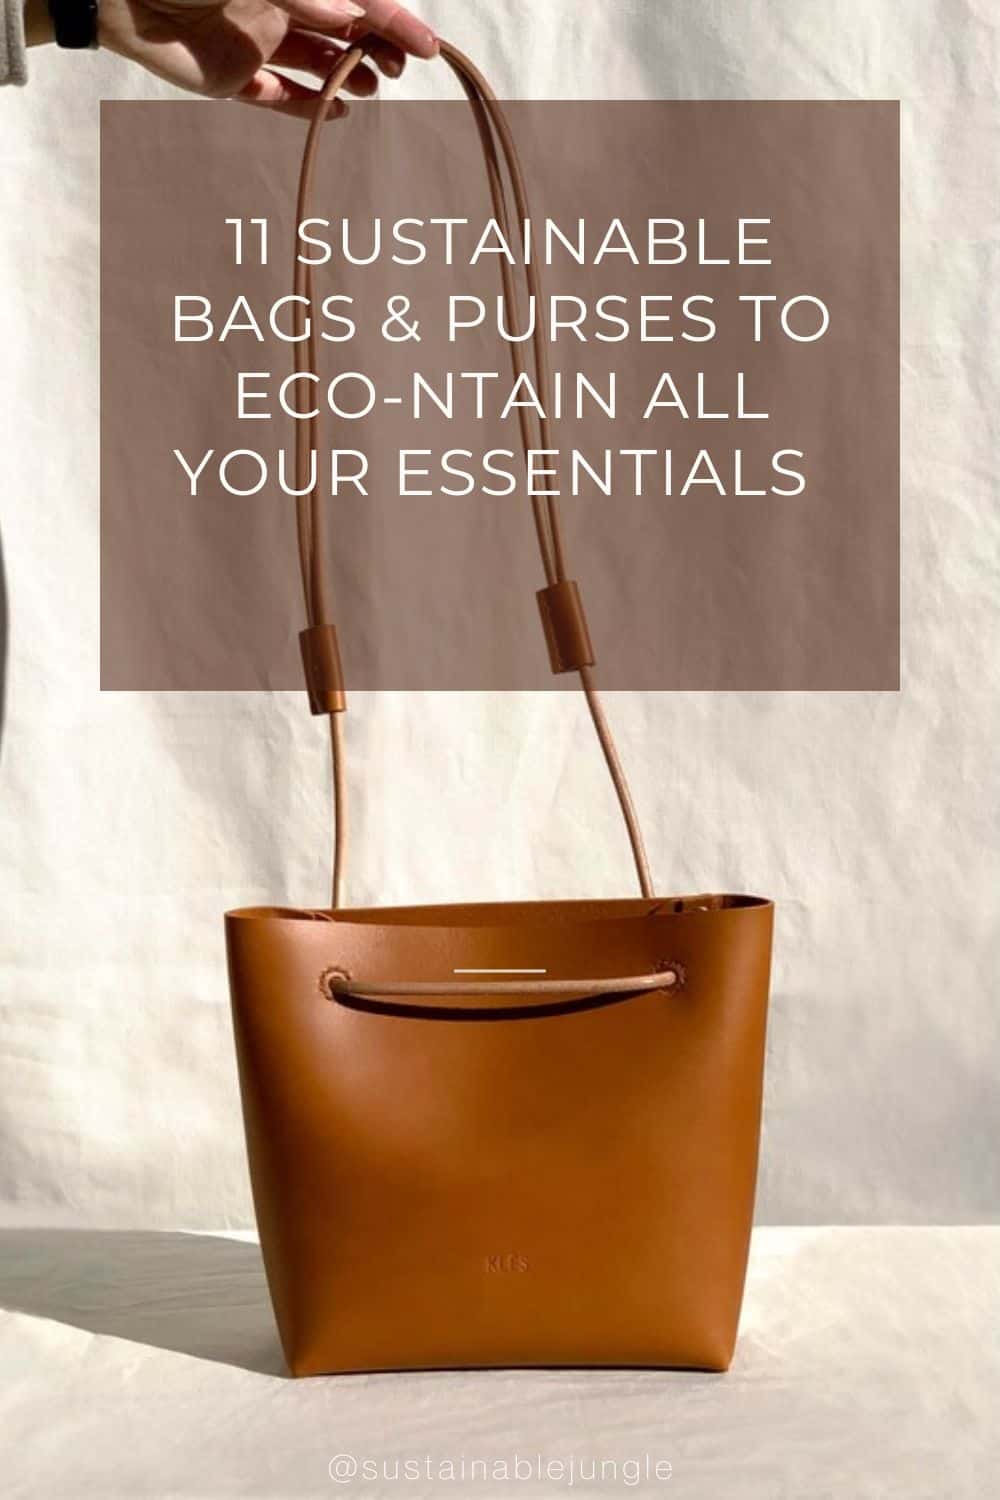 11 Sustainable Bags & Purses To Eco-ntain All Your Essentials Image by Klès #sustainablebags #sustainablehandbags #sustainablepurses #ecofriendlybags #ecofriendlyhandbags #ecofriendlypurses #ethicalbags